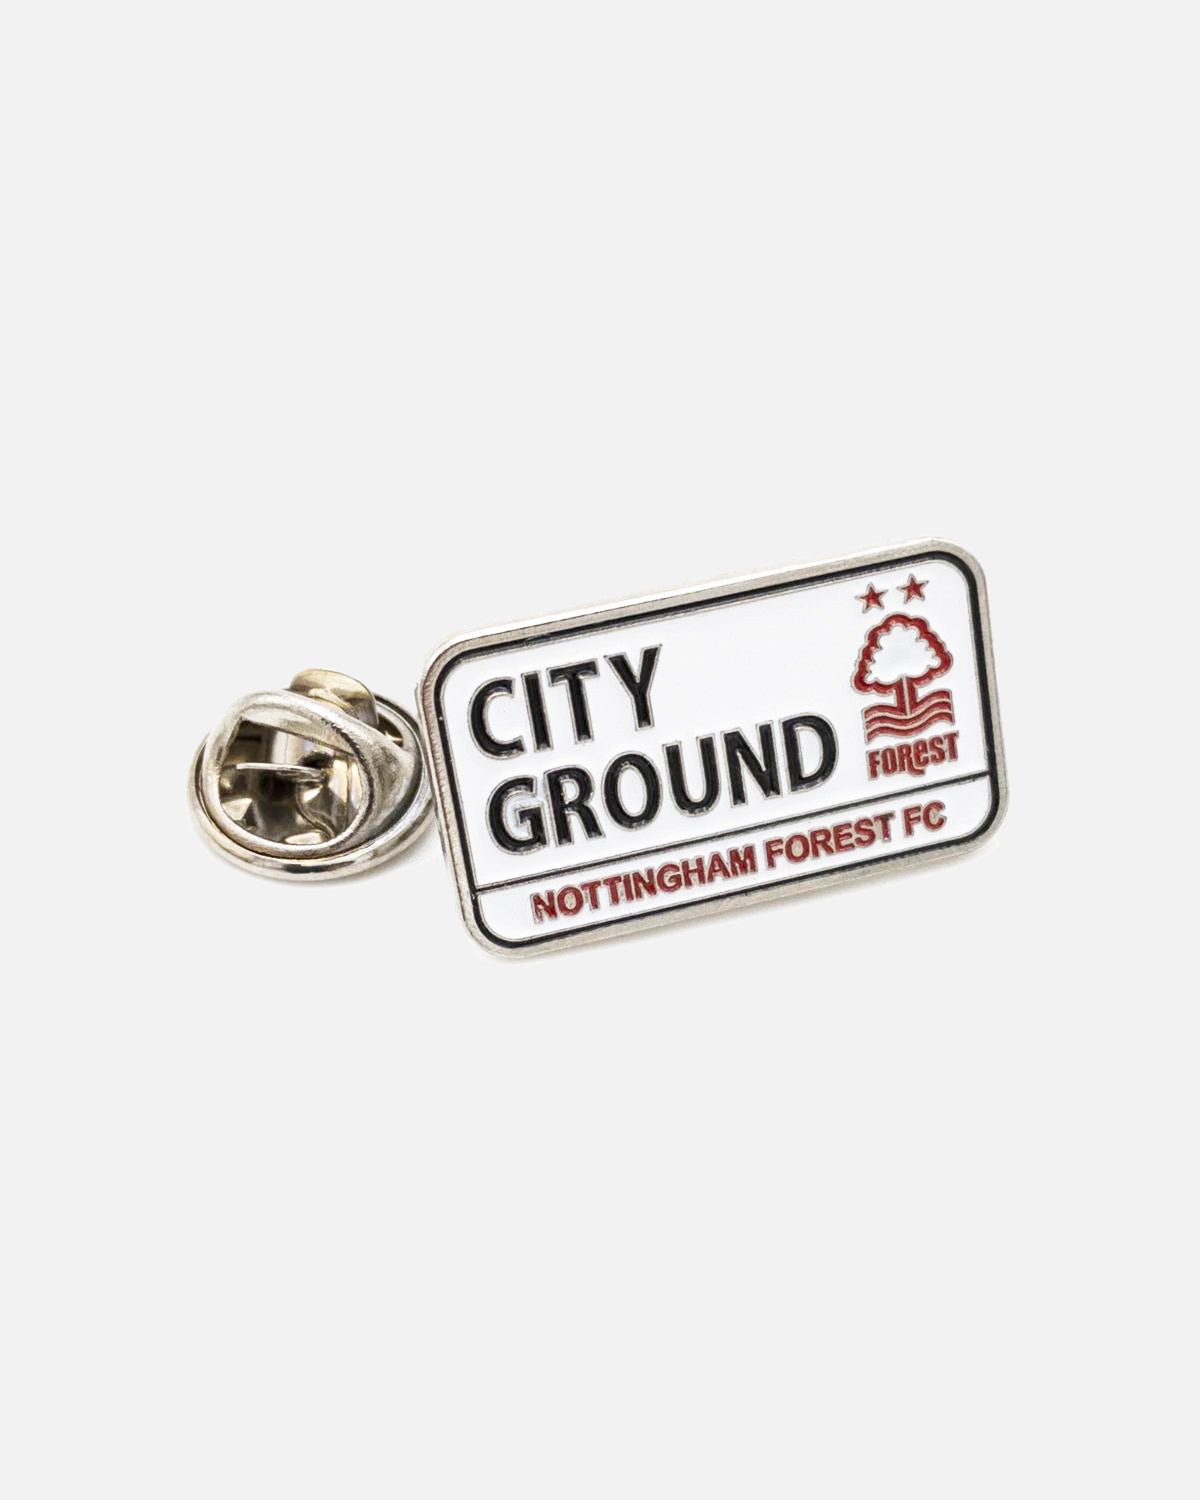 NFFC Street Sign Pin Badge - Nottingham Forest FC